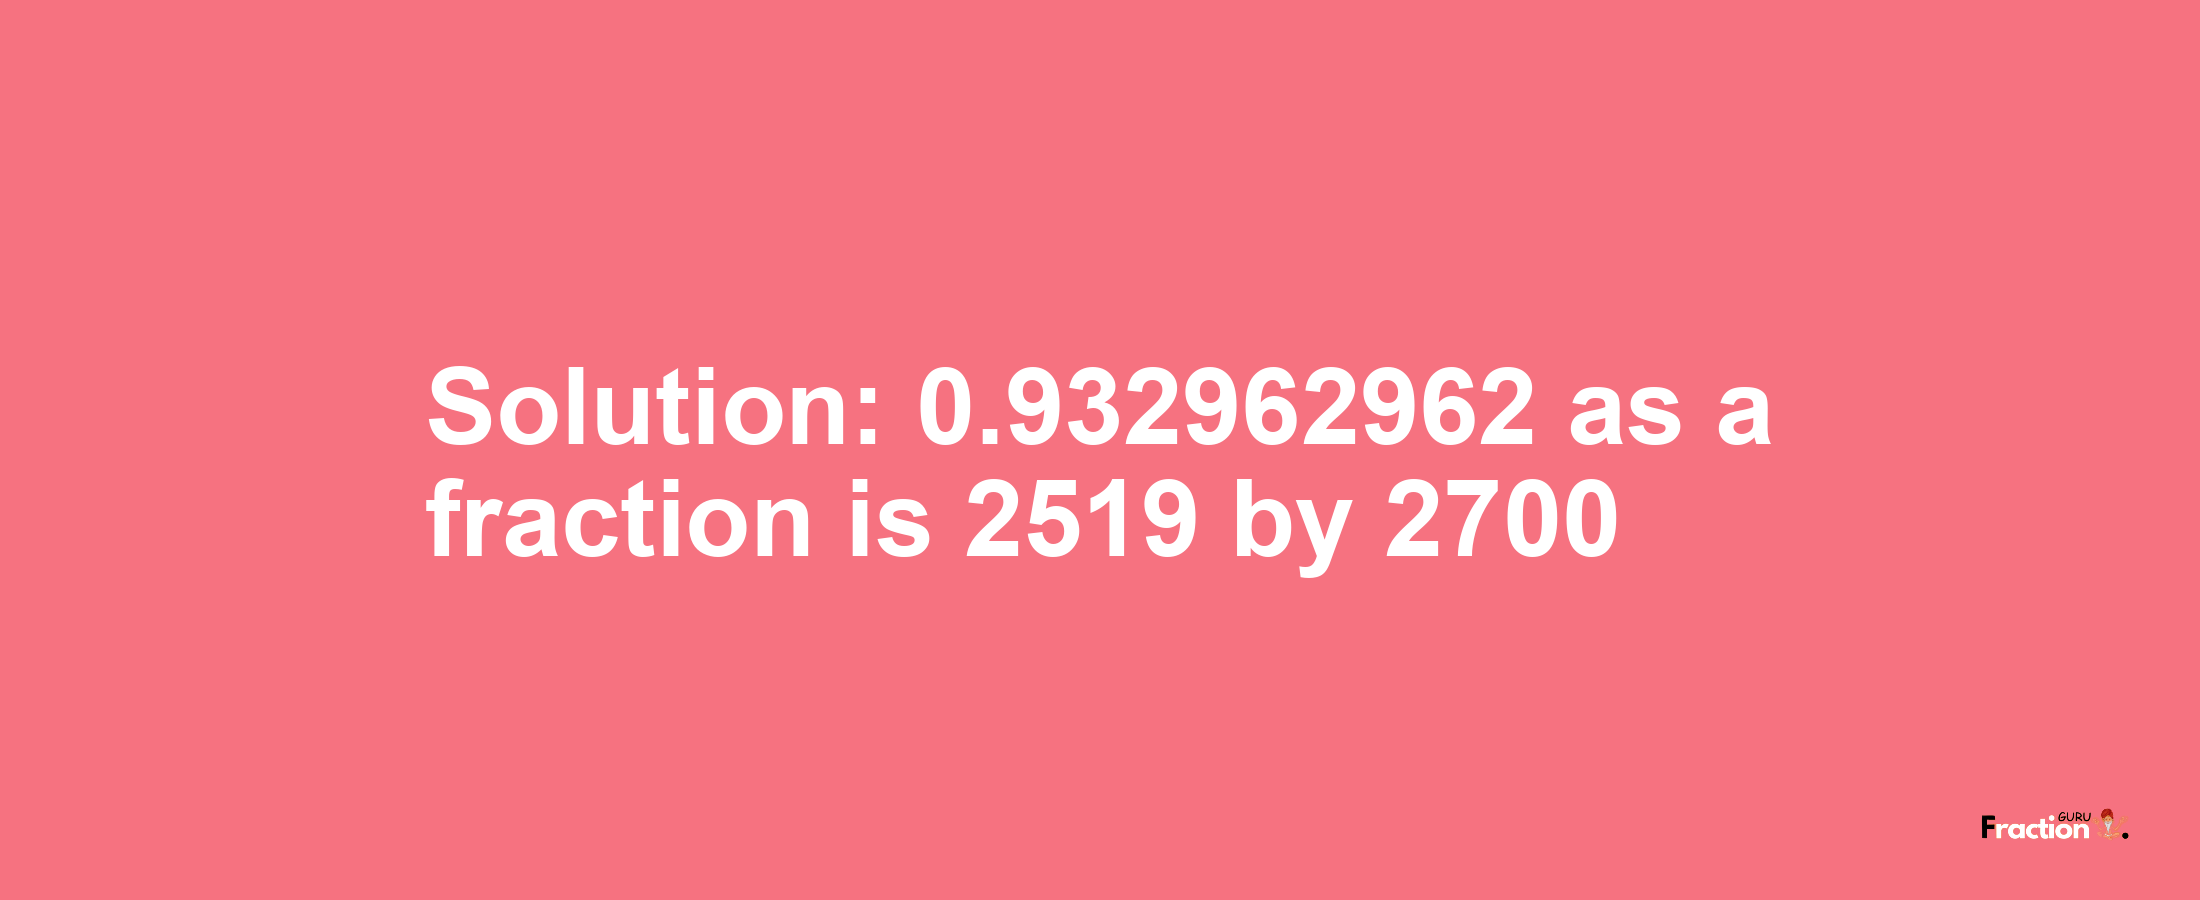 Solution:0.932962962 as a fraction is 2519/2700